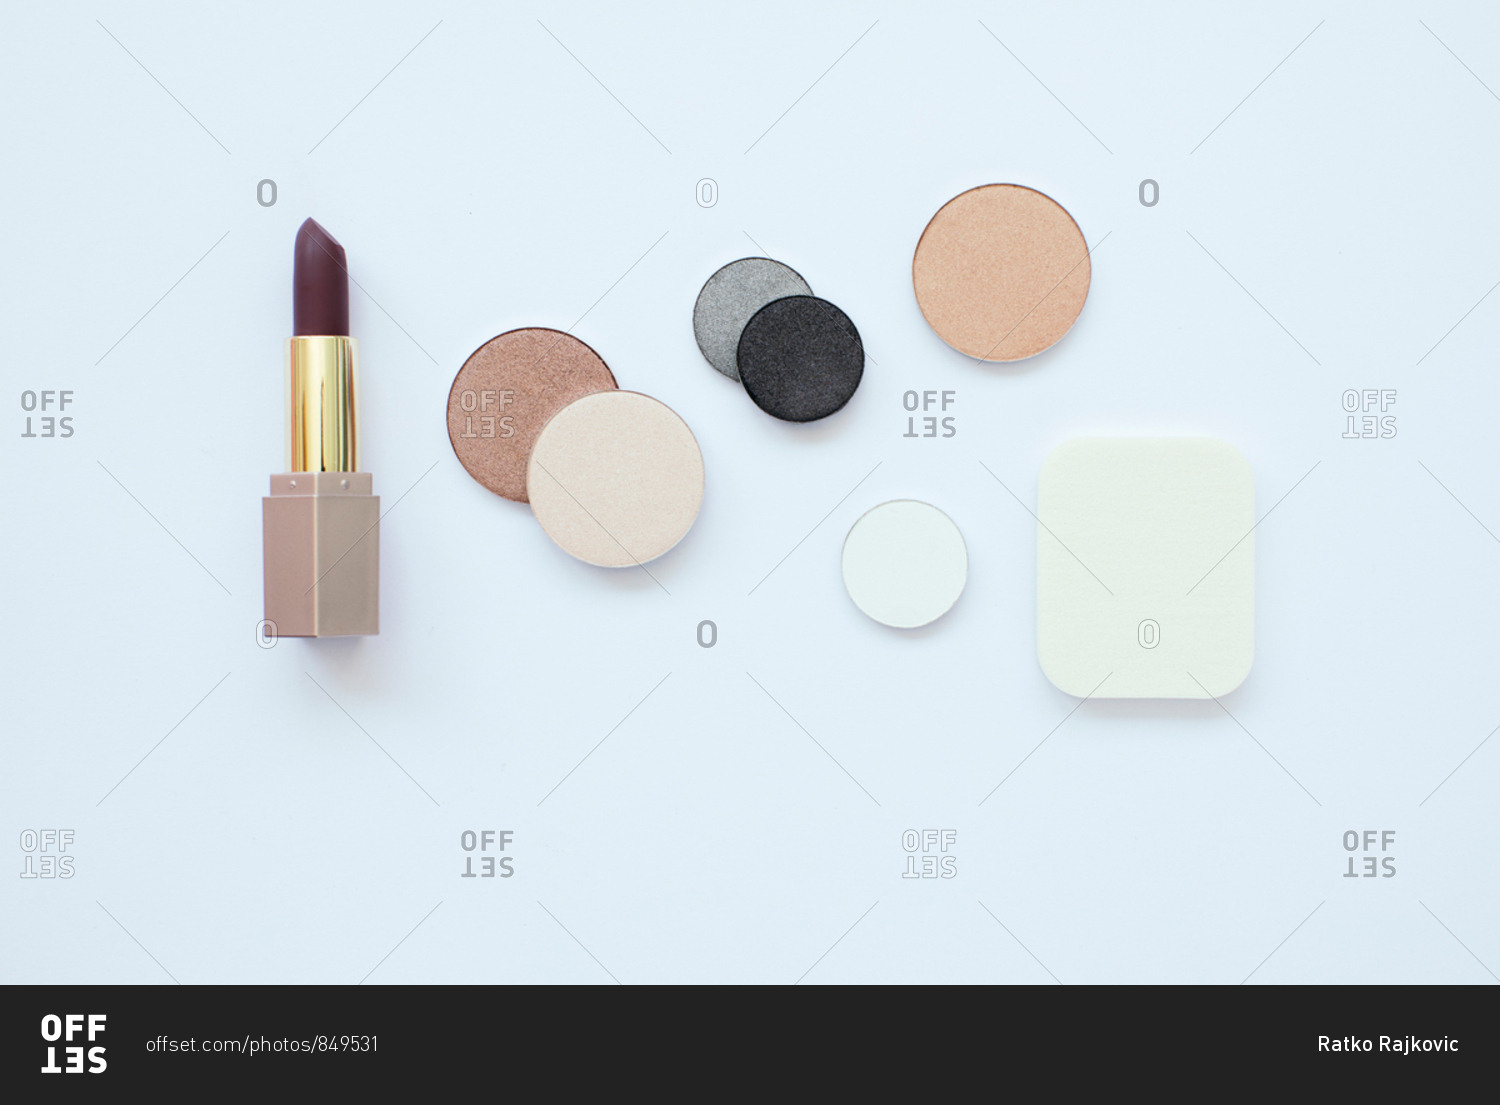 Flatlay of dark lipstick and pressed powders on a white background